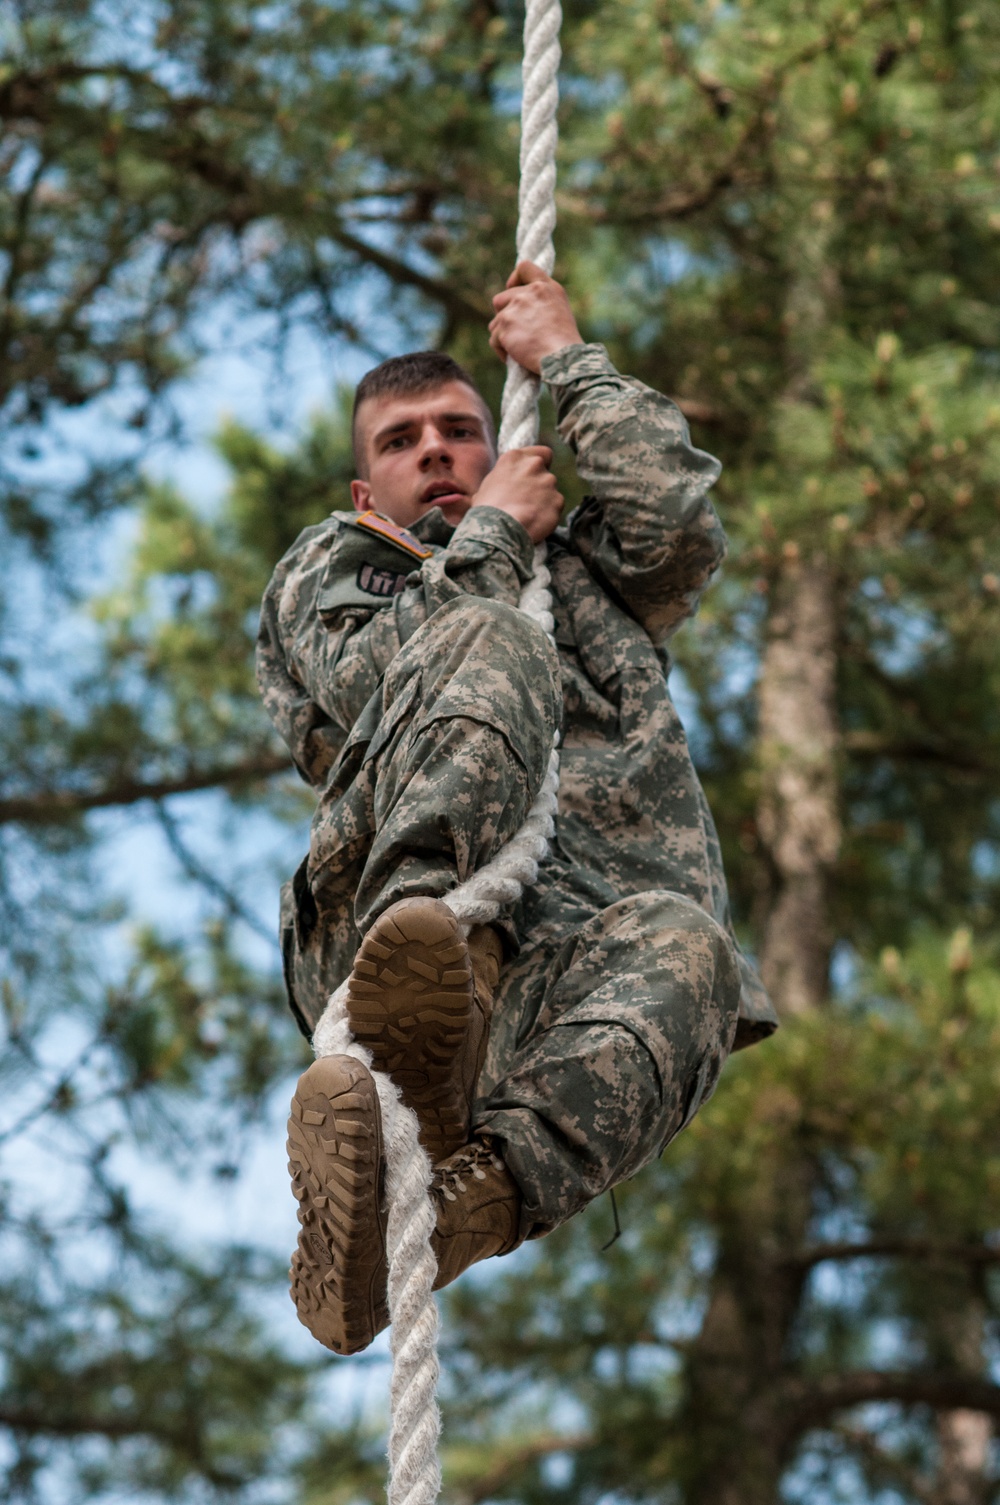 2015 US Army Reserve Best Warrior Competition:  Obstacle Course